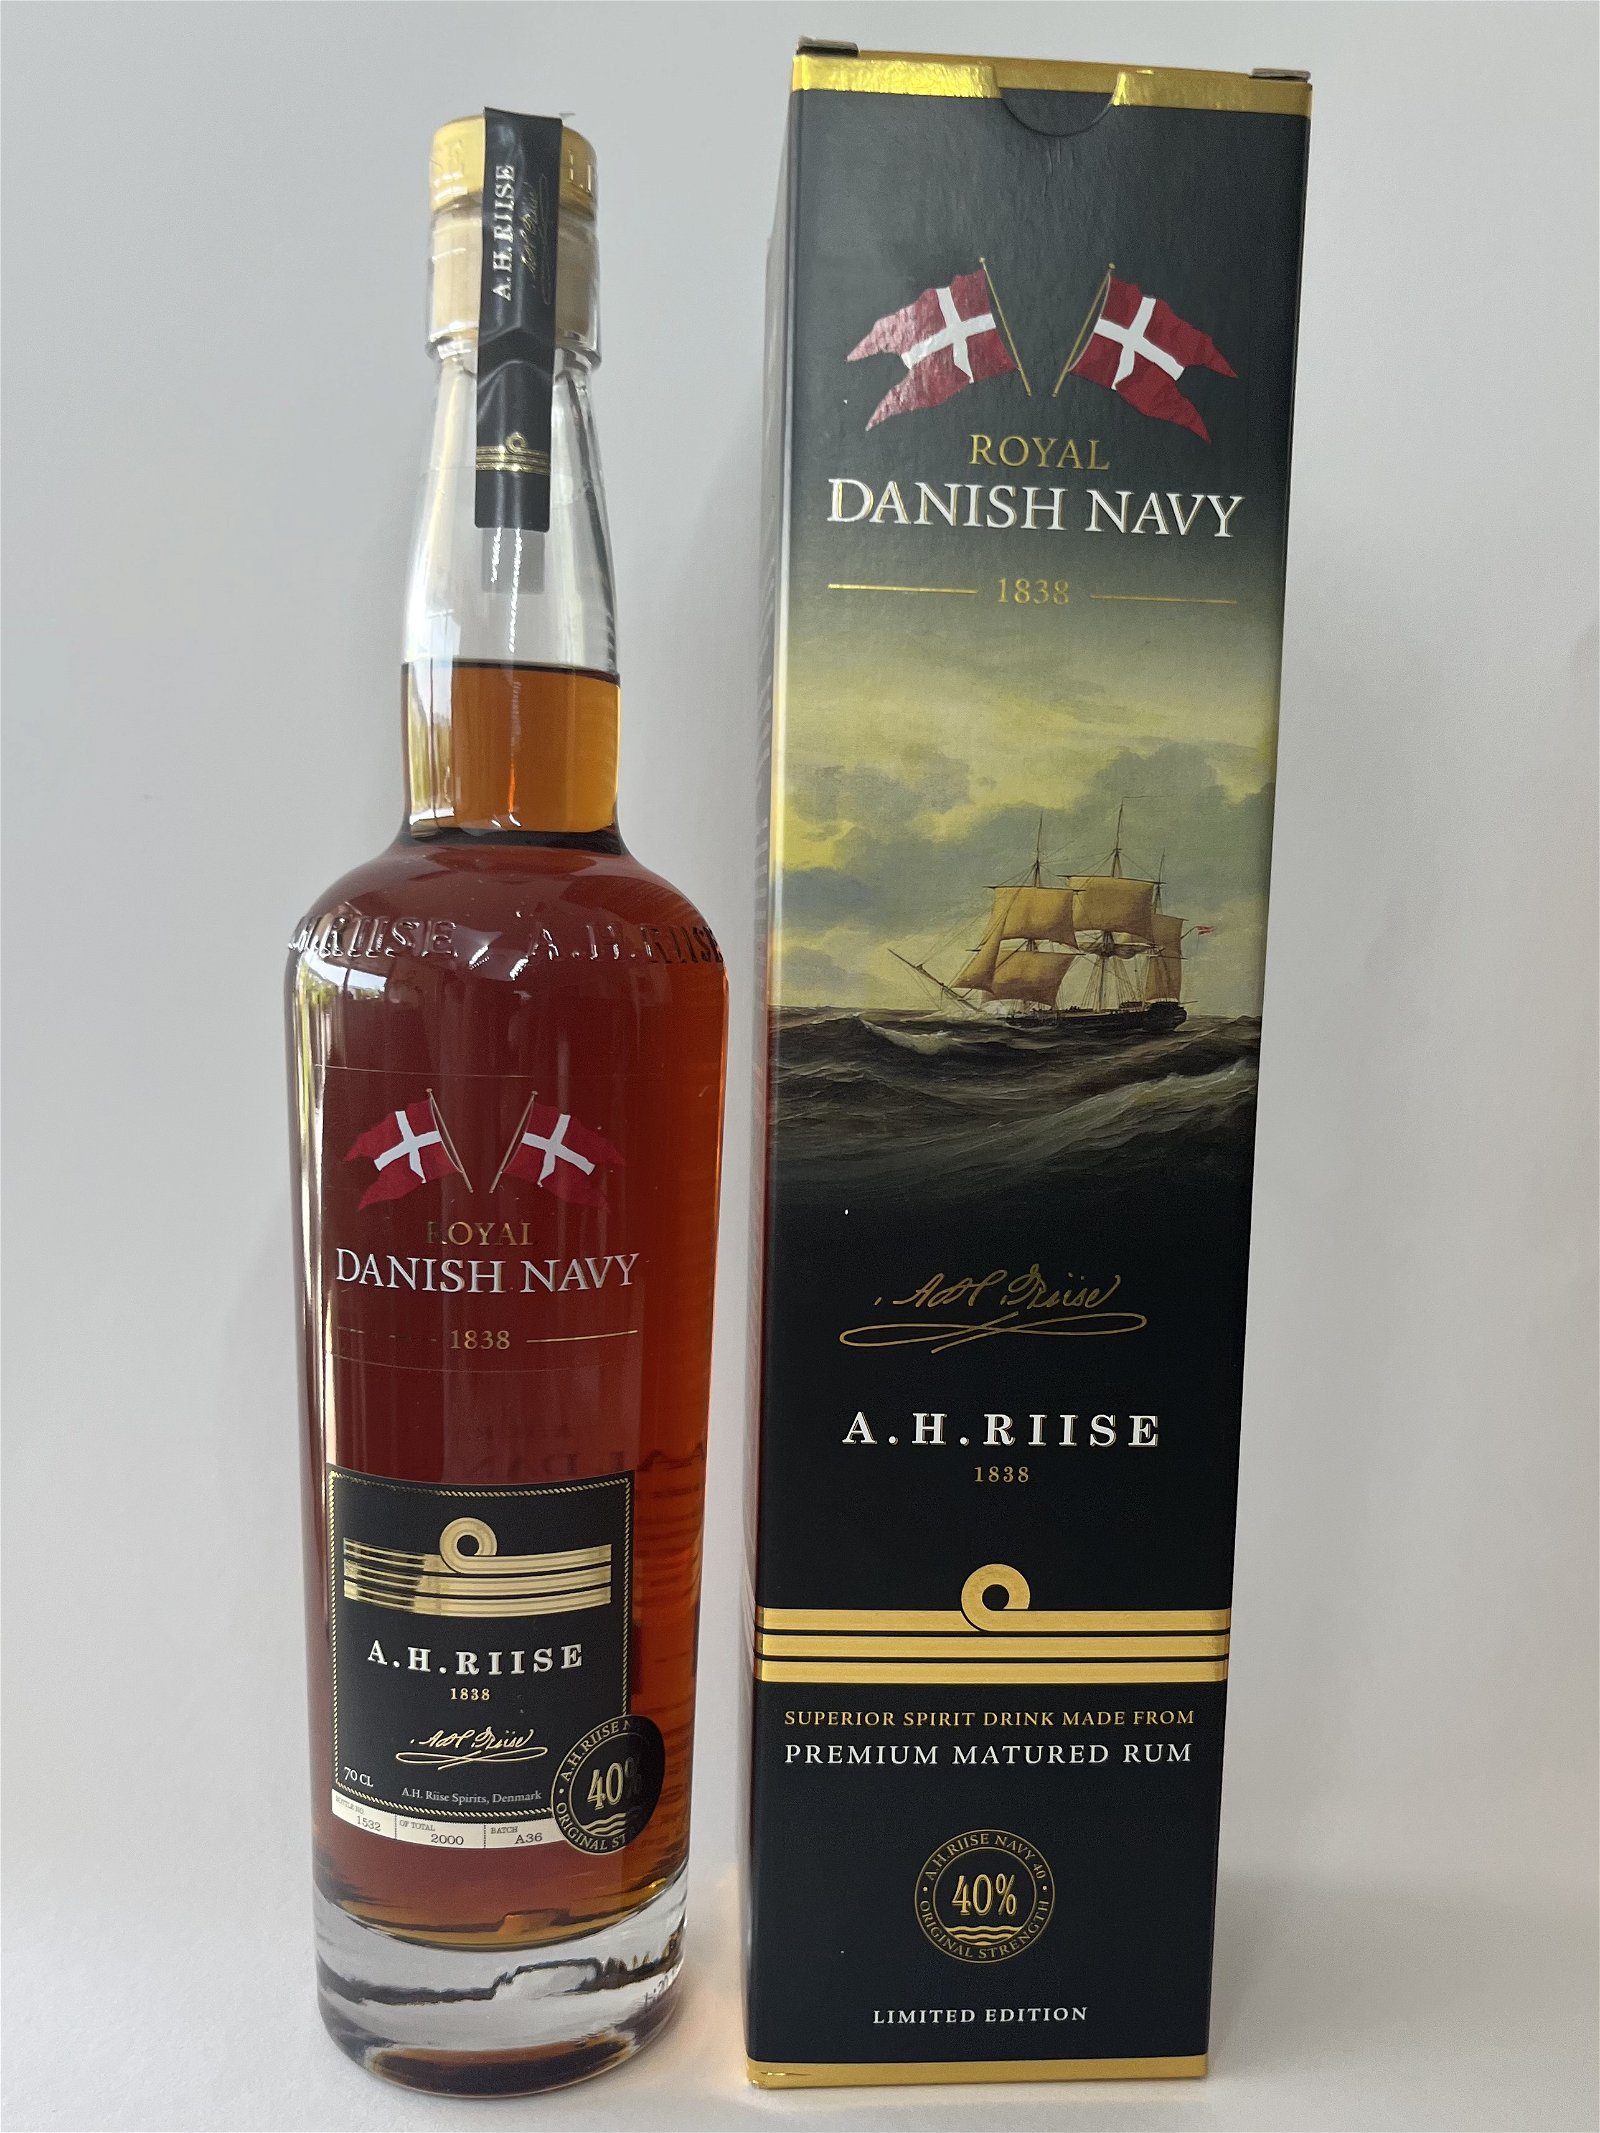 A. H. Riise Royal Danish Navy Rum 40% 70cl